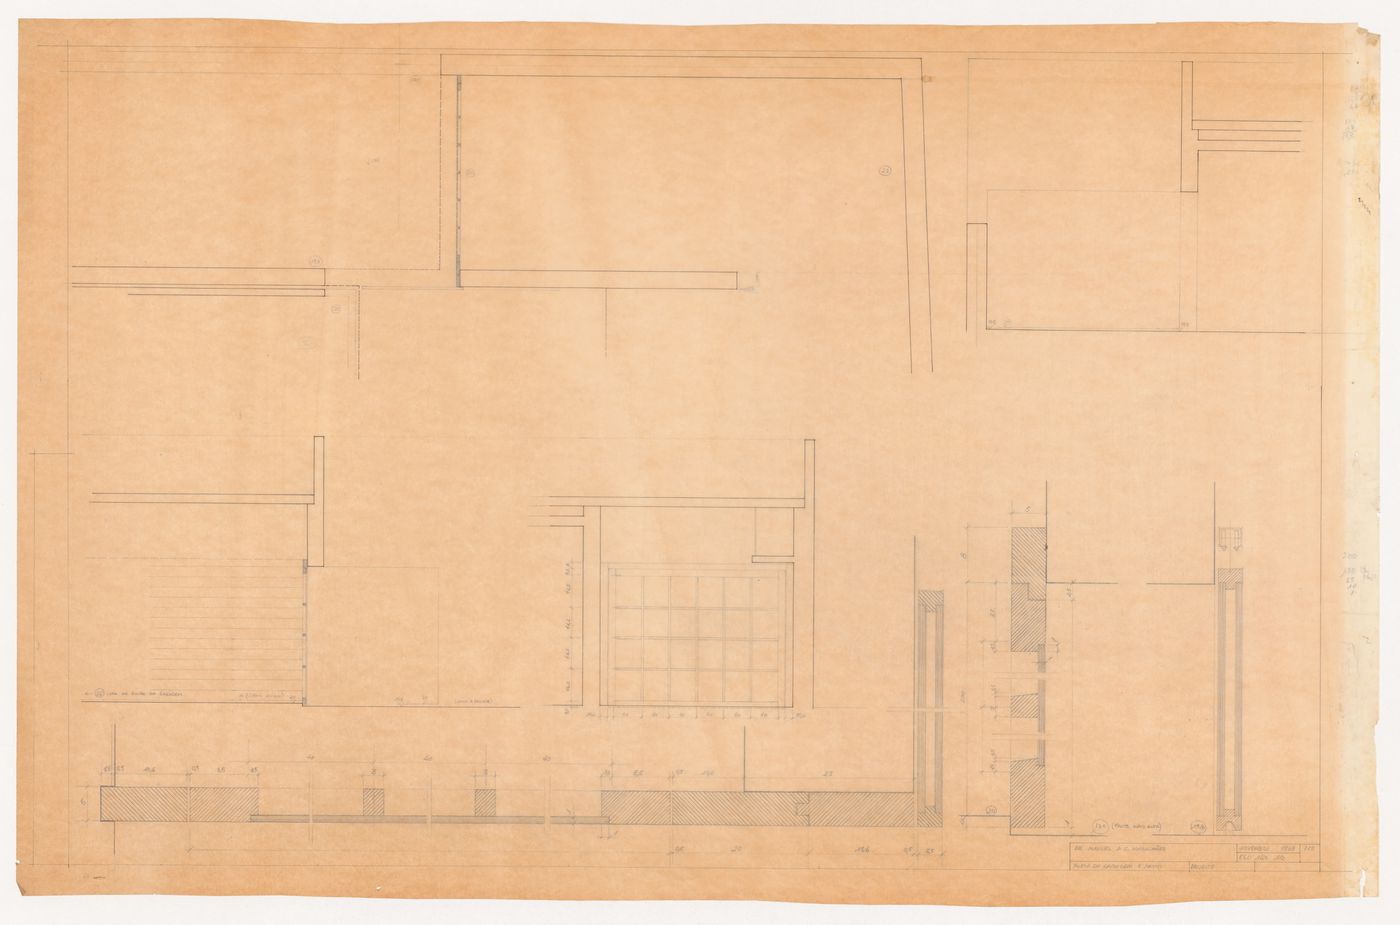 Drawings for garage and patio door for Casa Manuel Magalhães, Porto